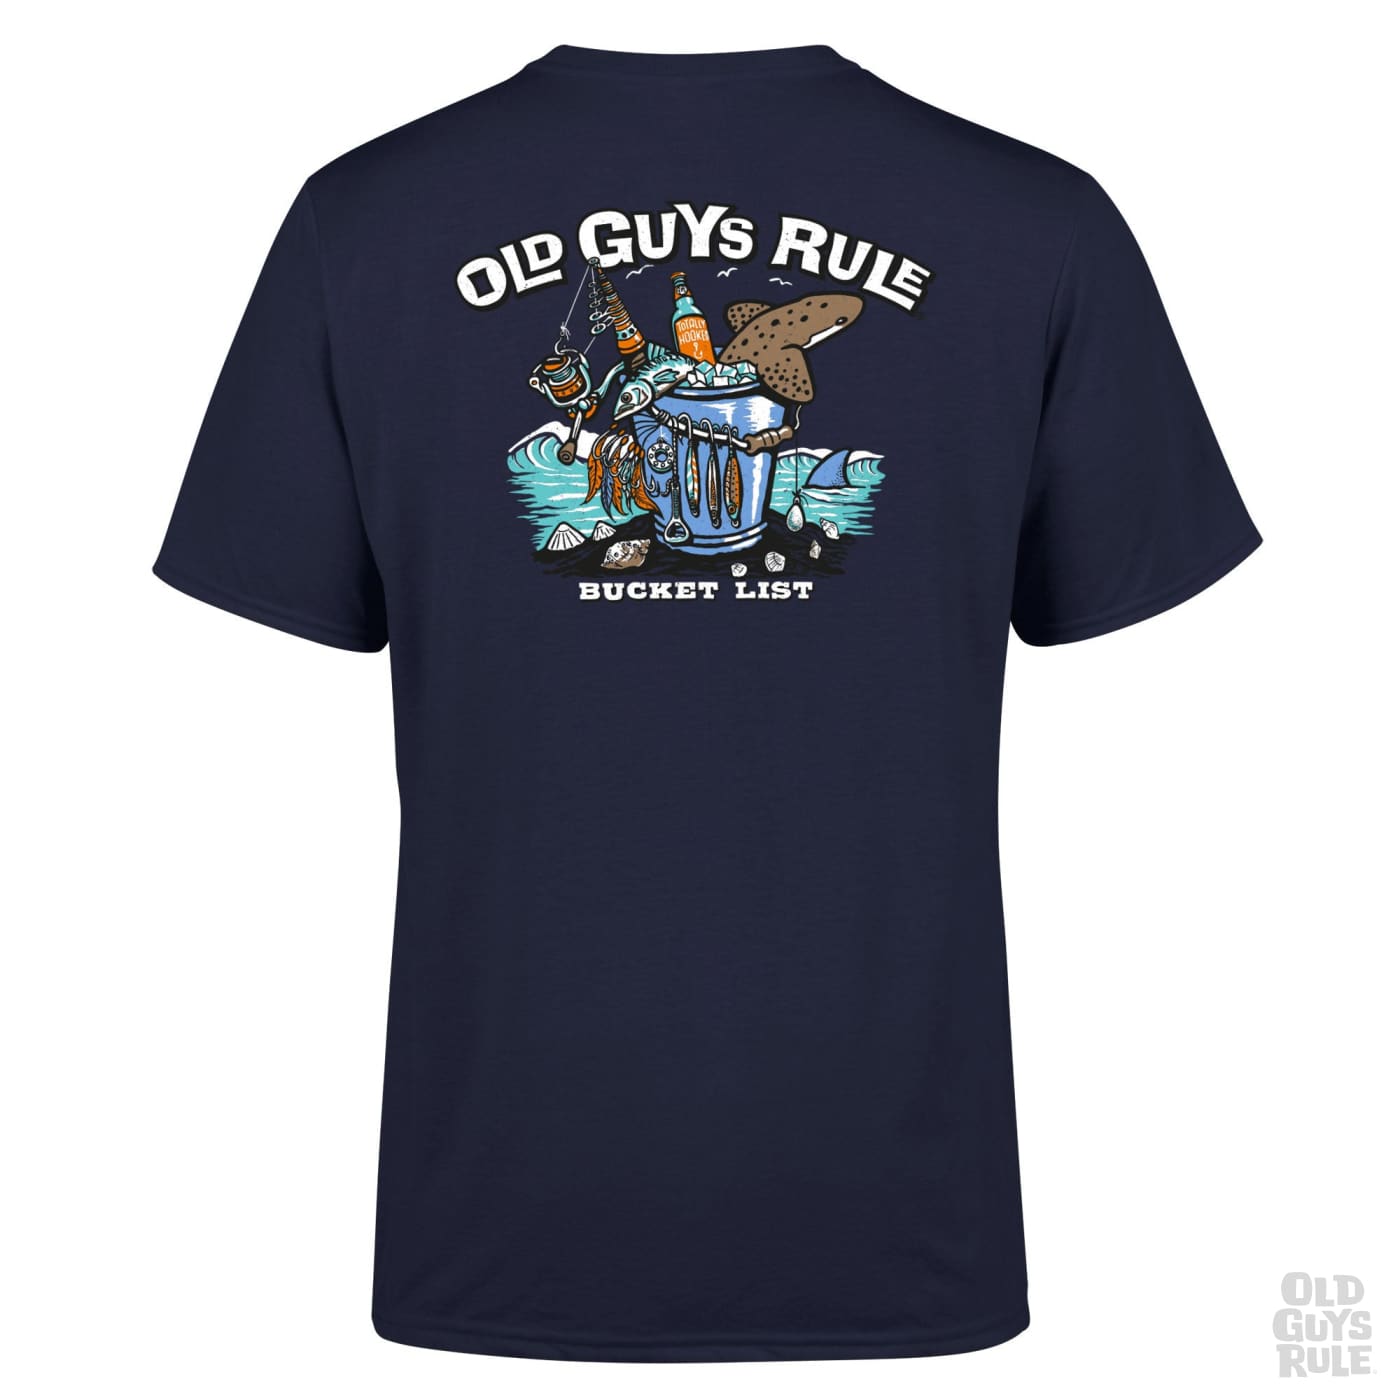 Products - Old Guys Rule